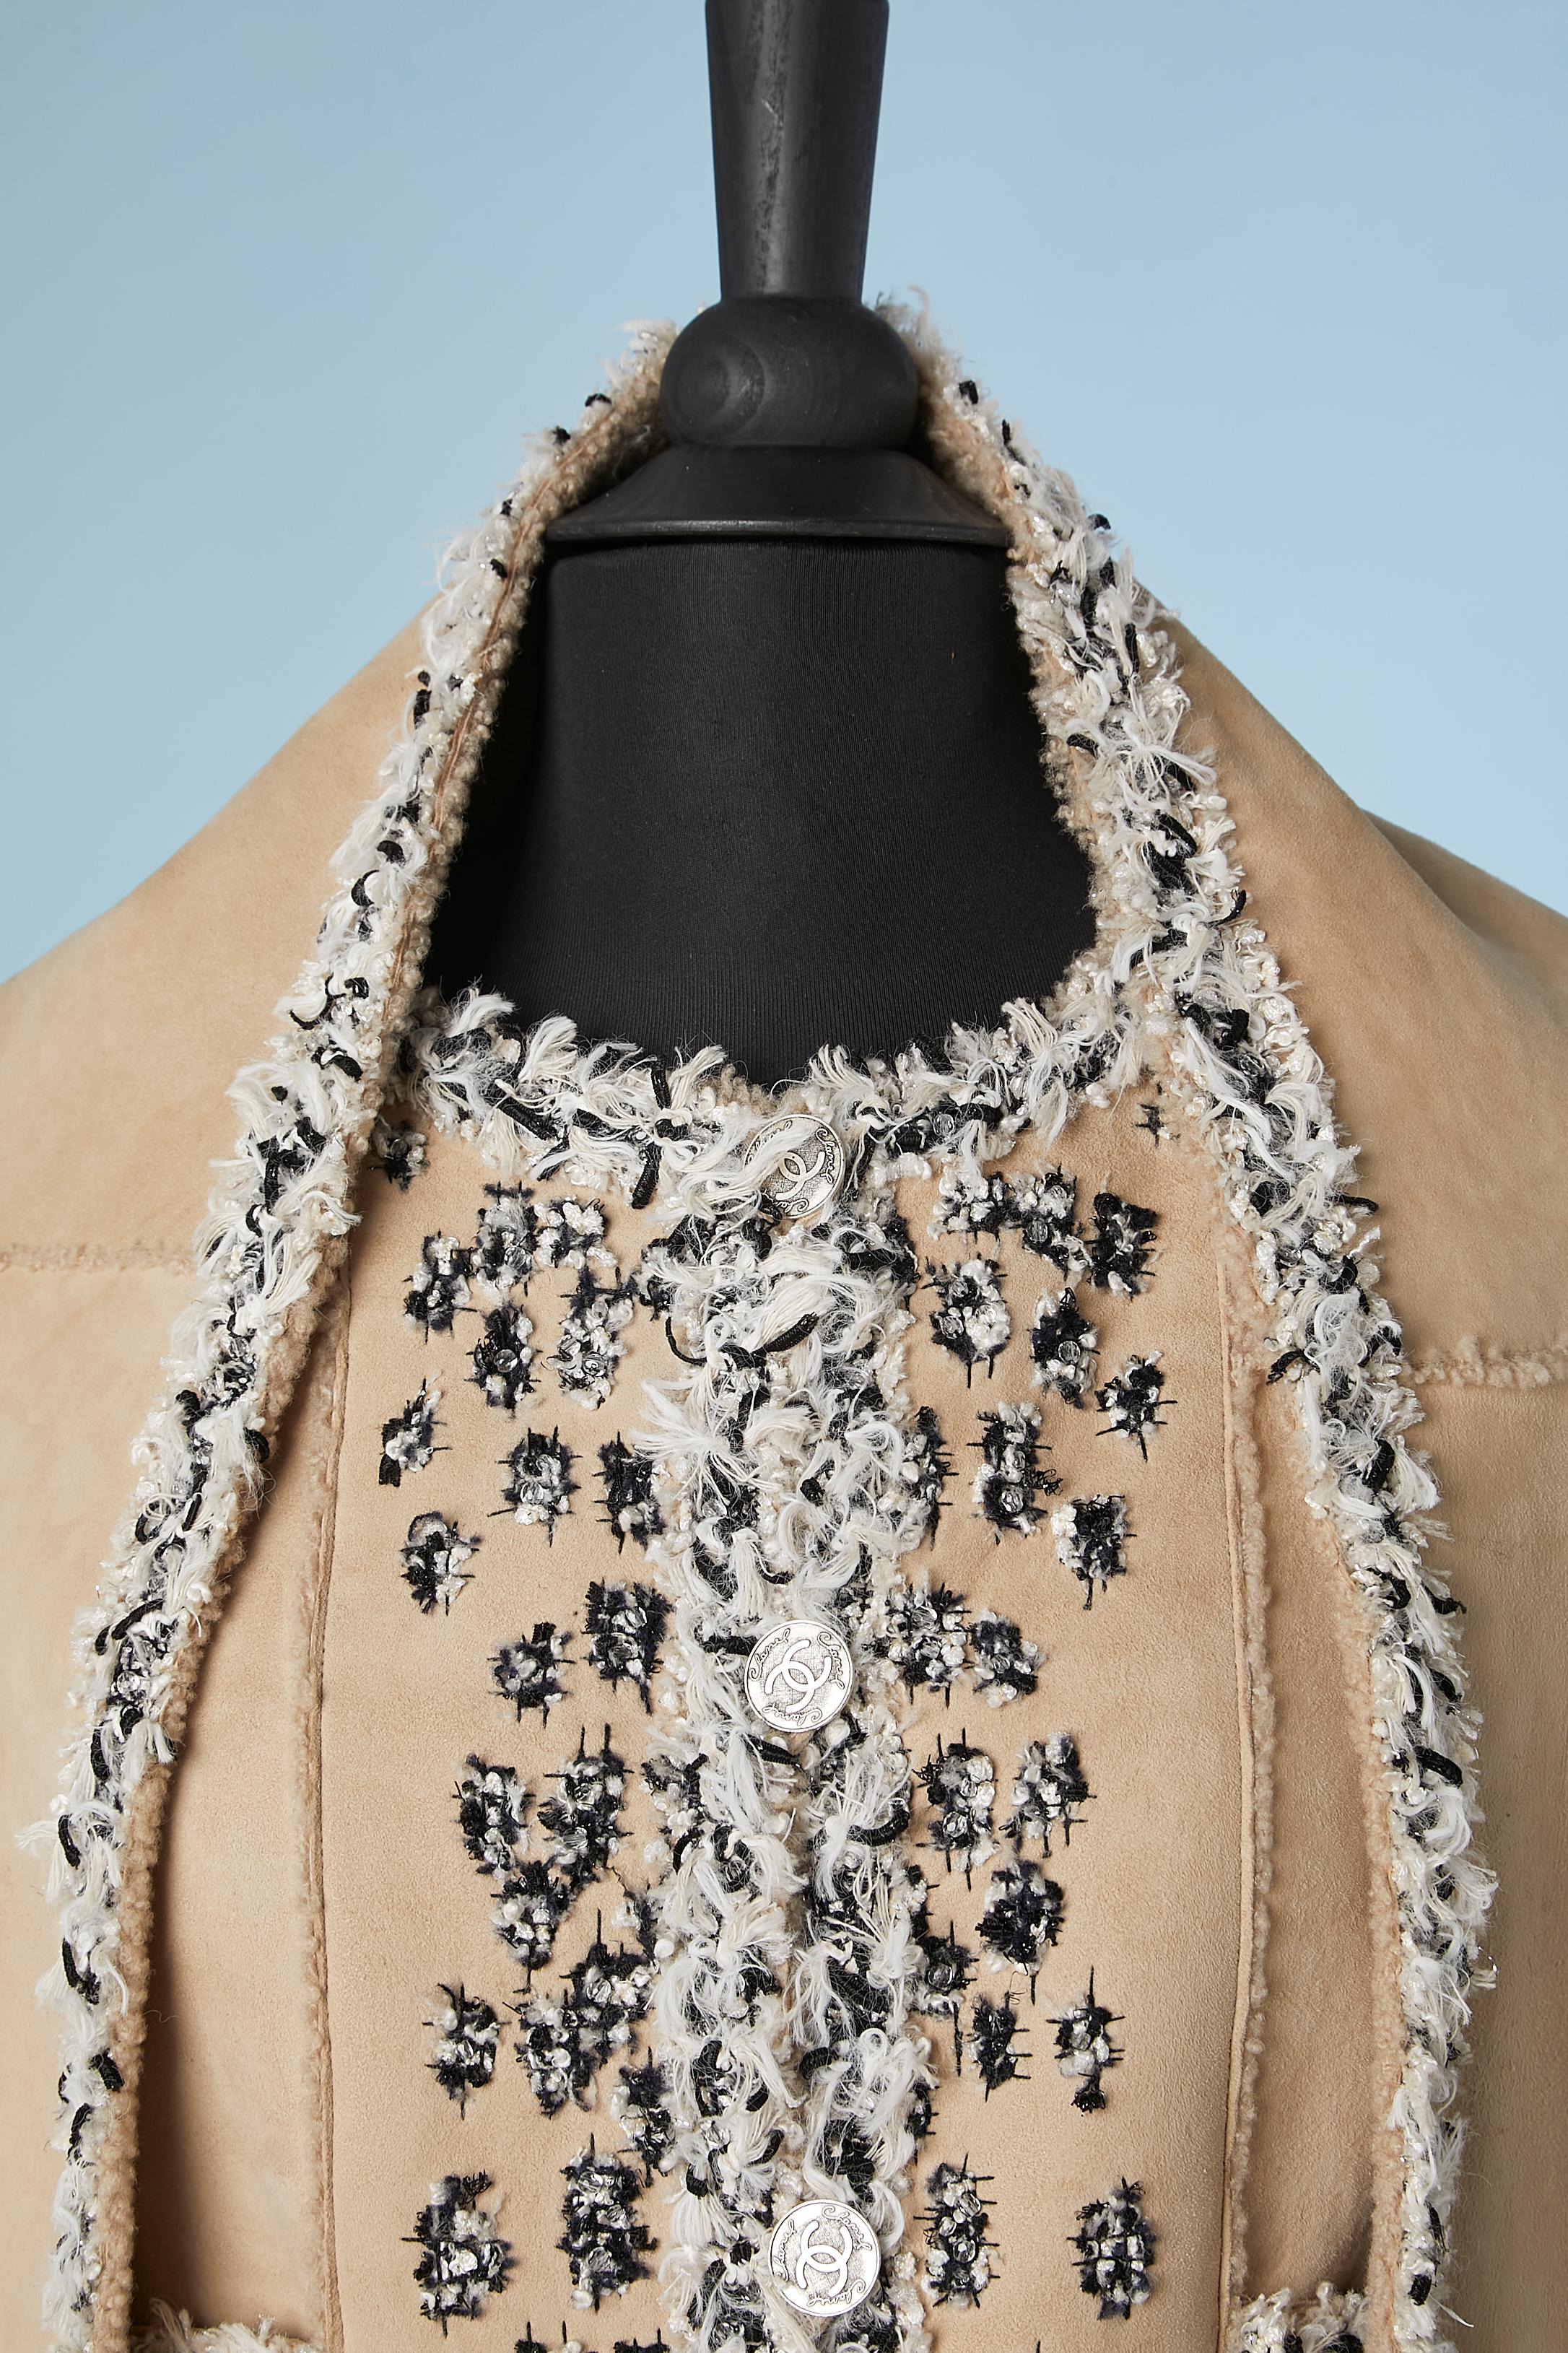 Beige baby-lamb shearling jacket and scarf with tweed and beads embroideries.
Branded button. 
Scarf dimension : 140 cm X 30 cm 